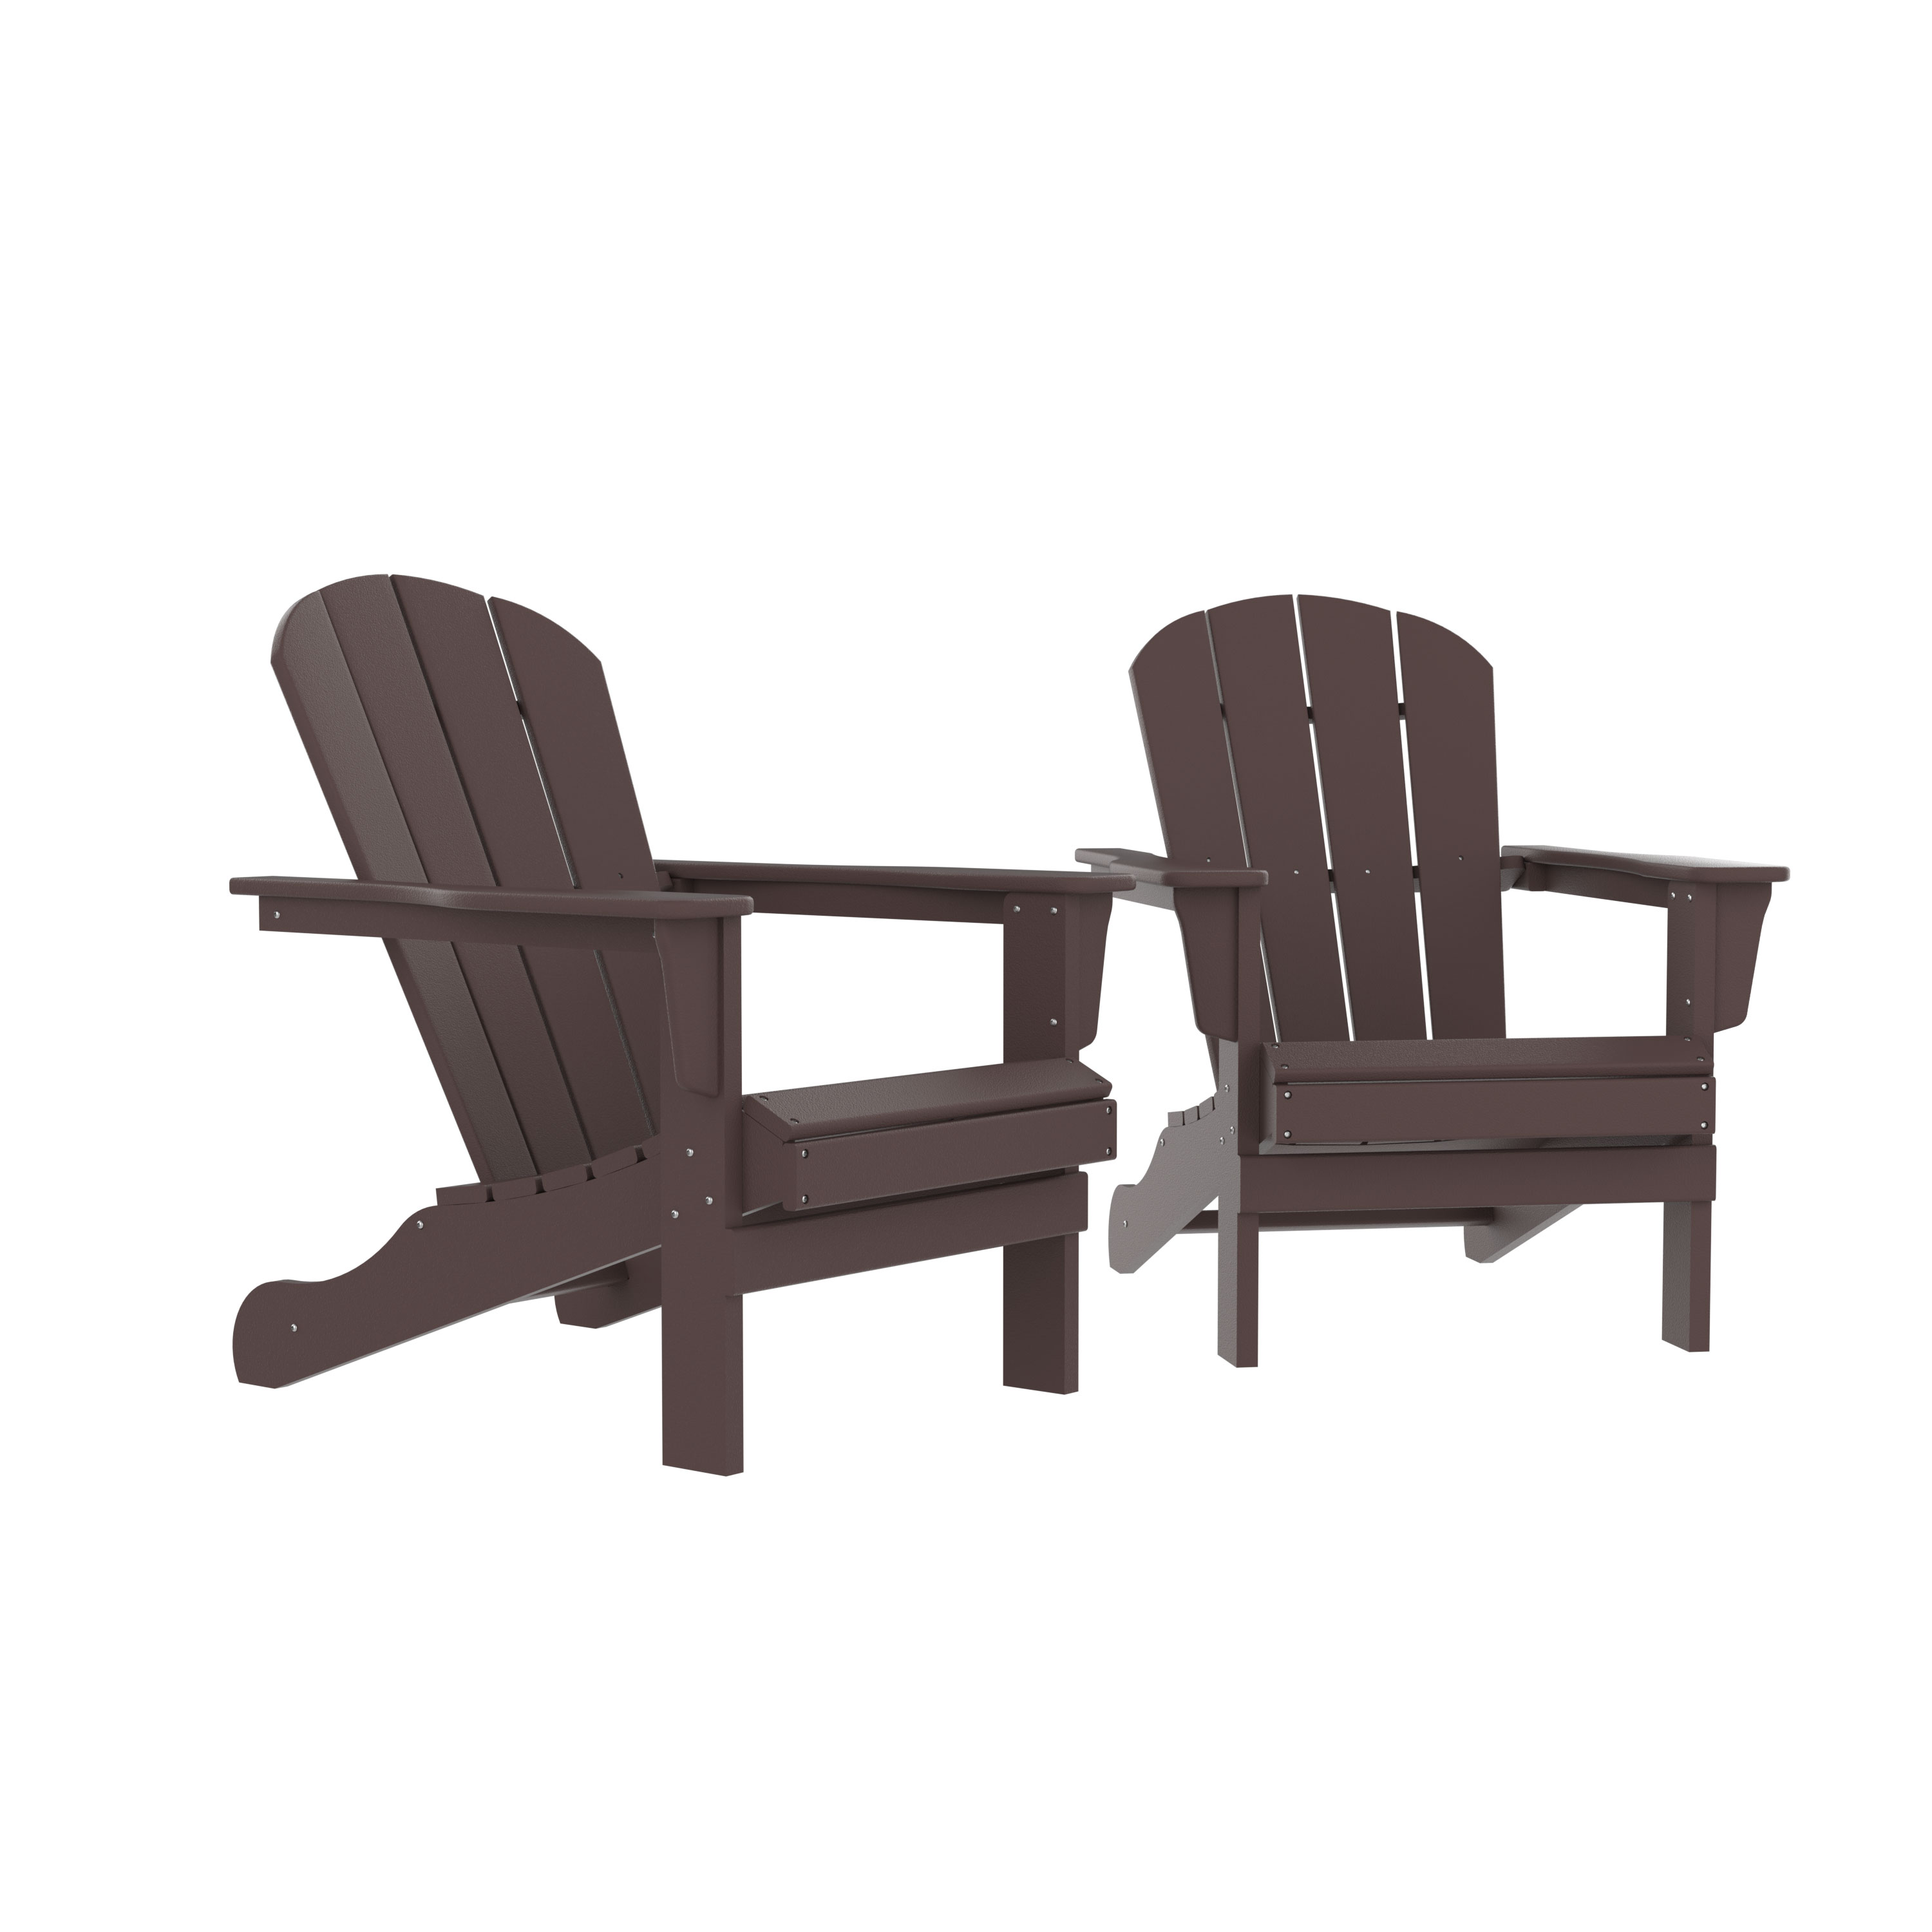 Adirondack Chair, Fire Pit Chairs, Sand Chair, Patio Outdoor Chairs, Dpe Plastic Resin Deck Chair, Lawn Chairs, Adult Size, Weather Resistant For Patio/ Backyard/Garden, Brown, Set Of 2 - image 1 of 6